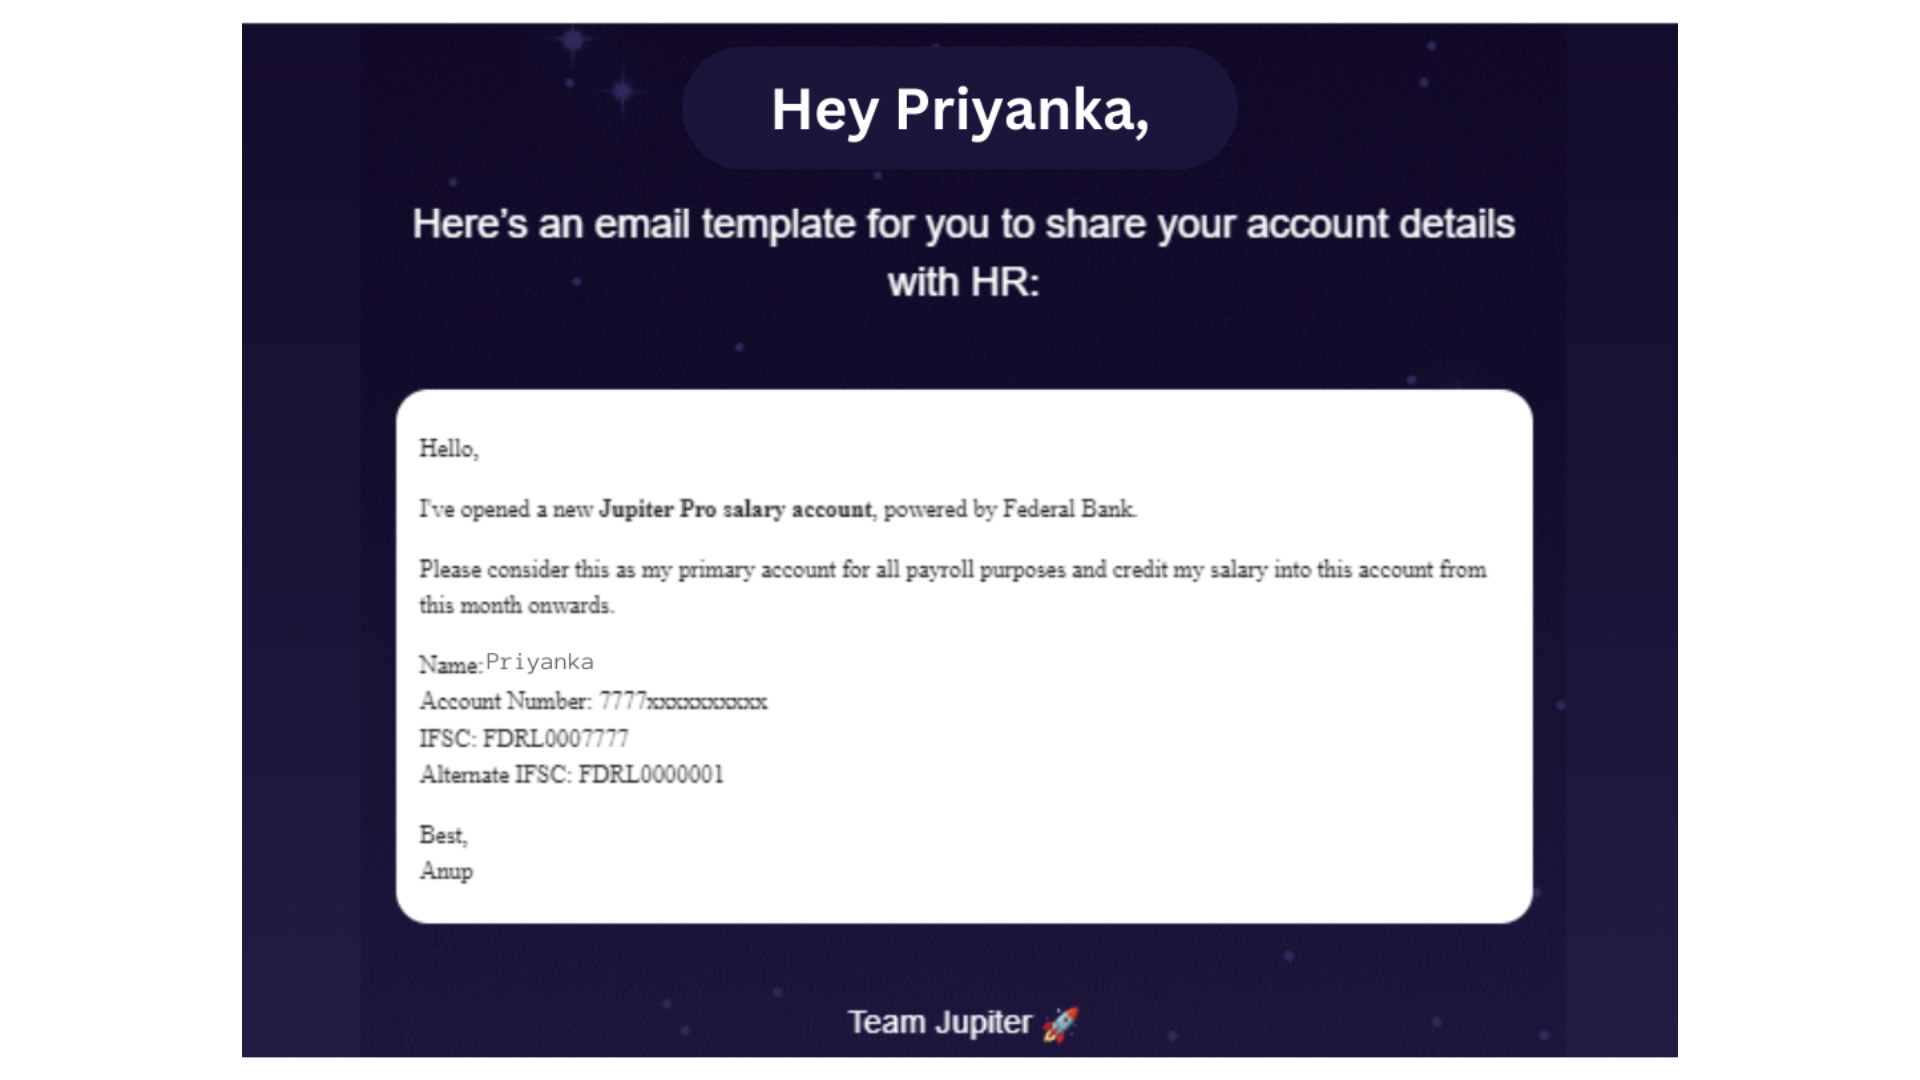 Email Template by Jupiter Team for a Salary Account